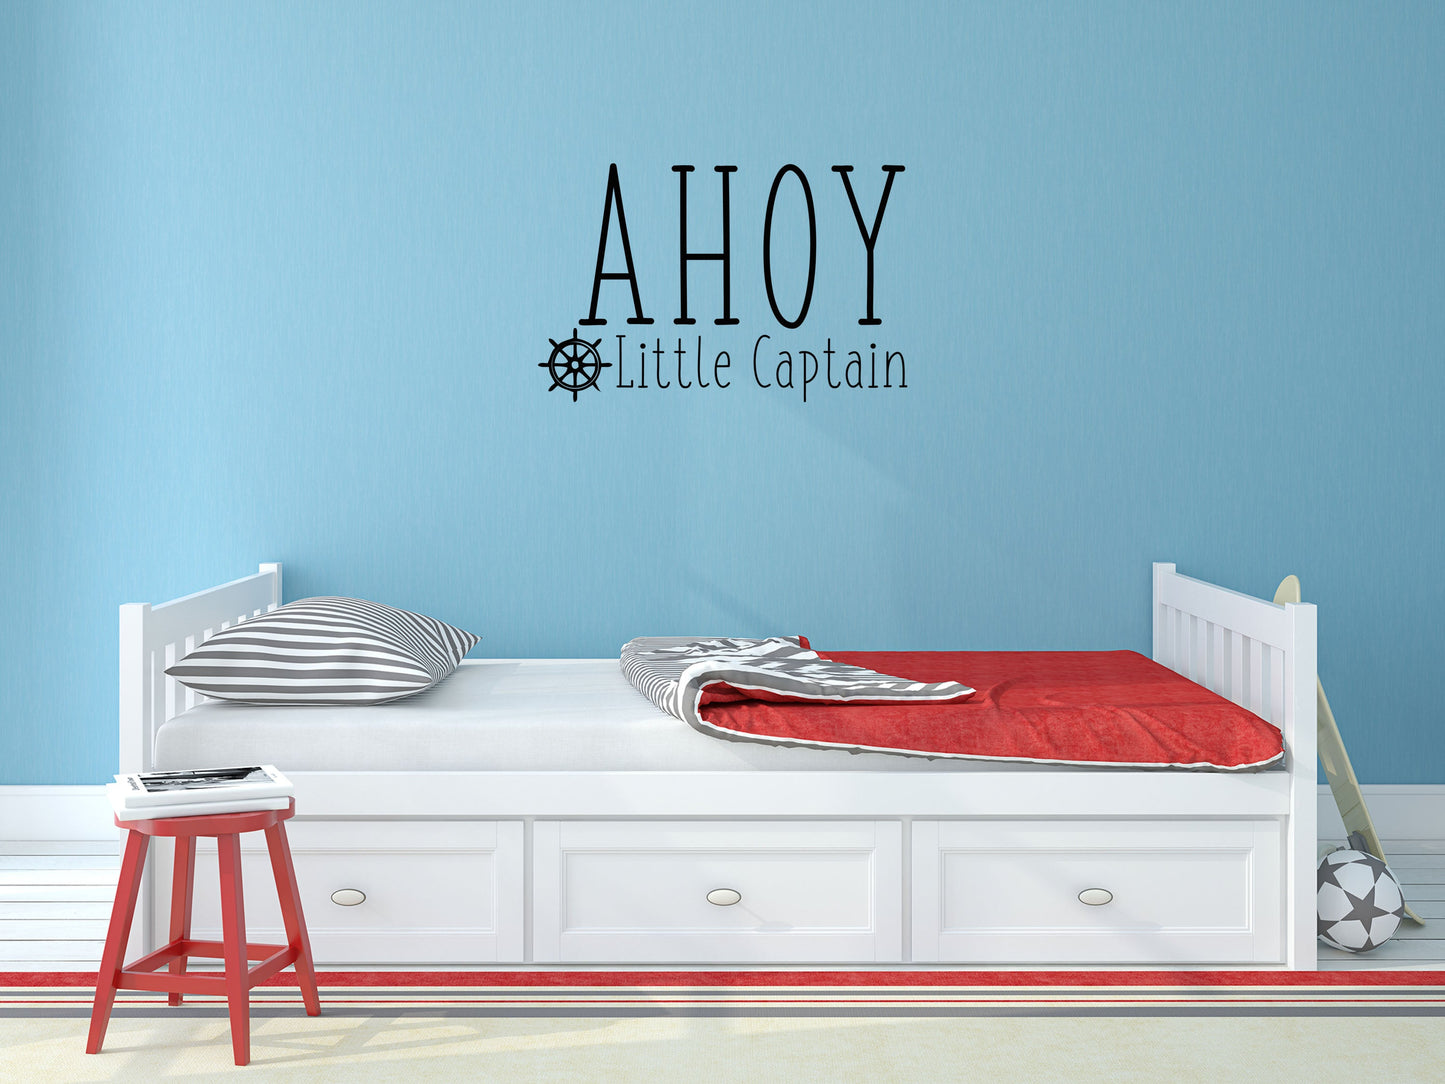 Ahoy Little Captain Boys Nursery Wall Stickers- Inspirational Wall Decals Vinyl Wall Decal Done 